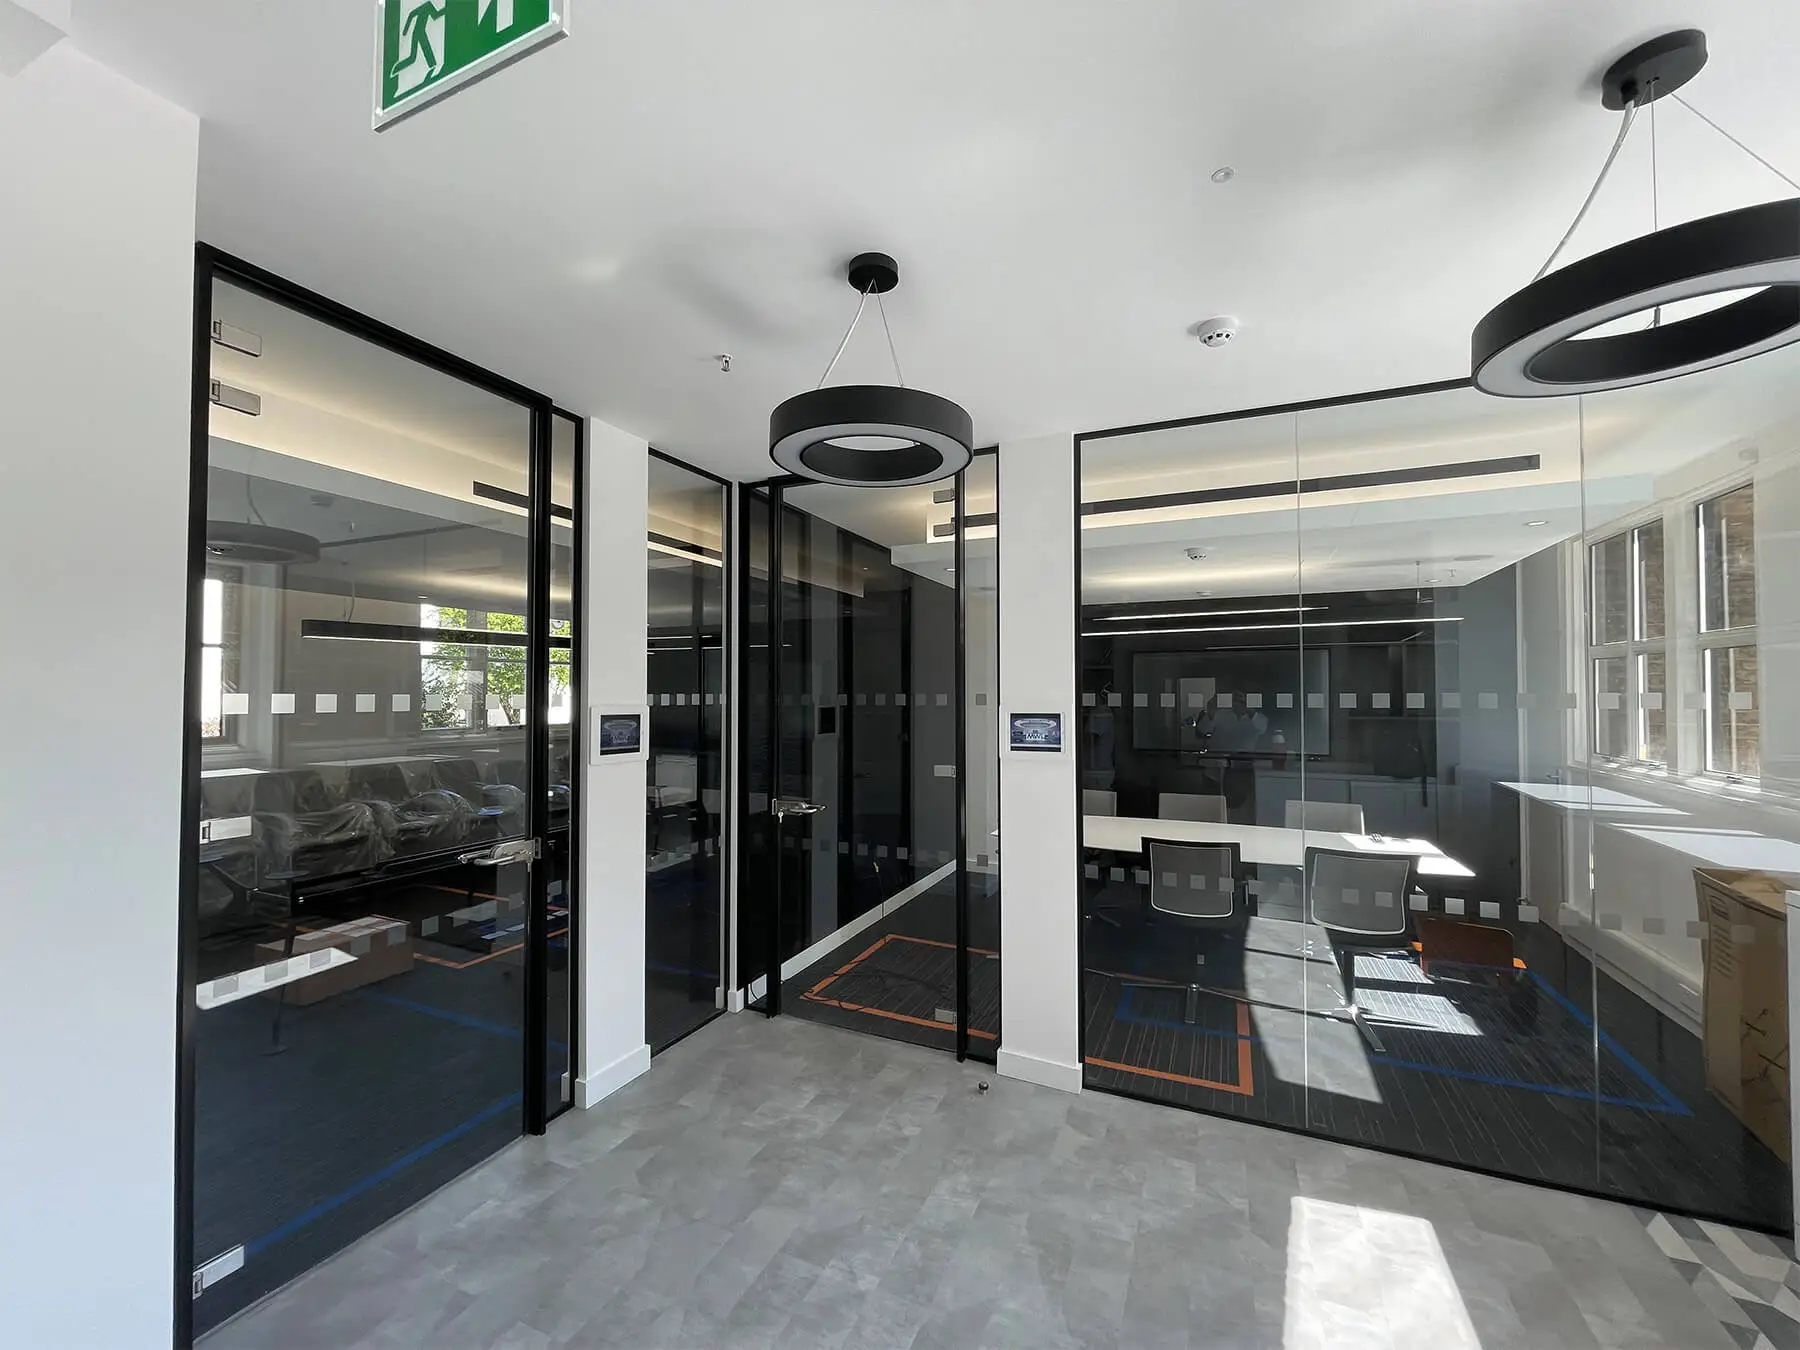 Office waiting andmeeting spaces with single glazed partiton with framed doors